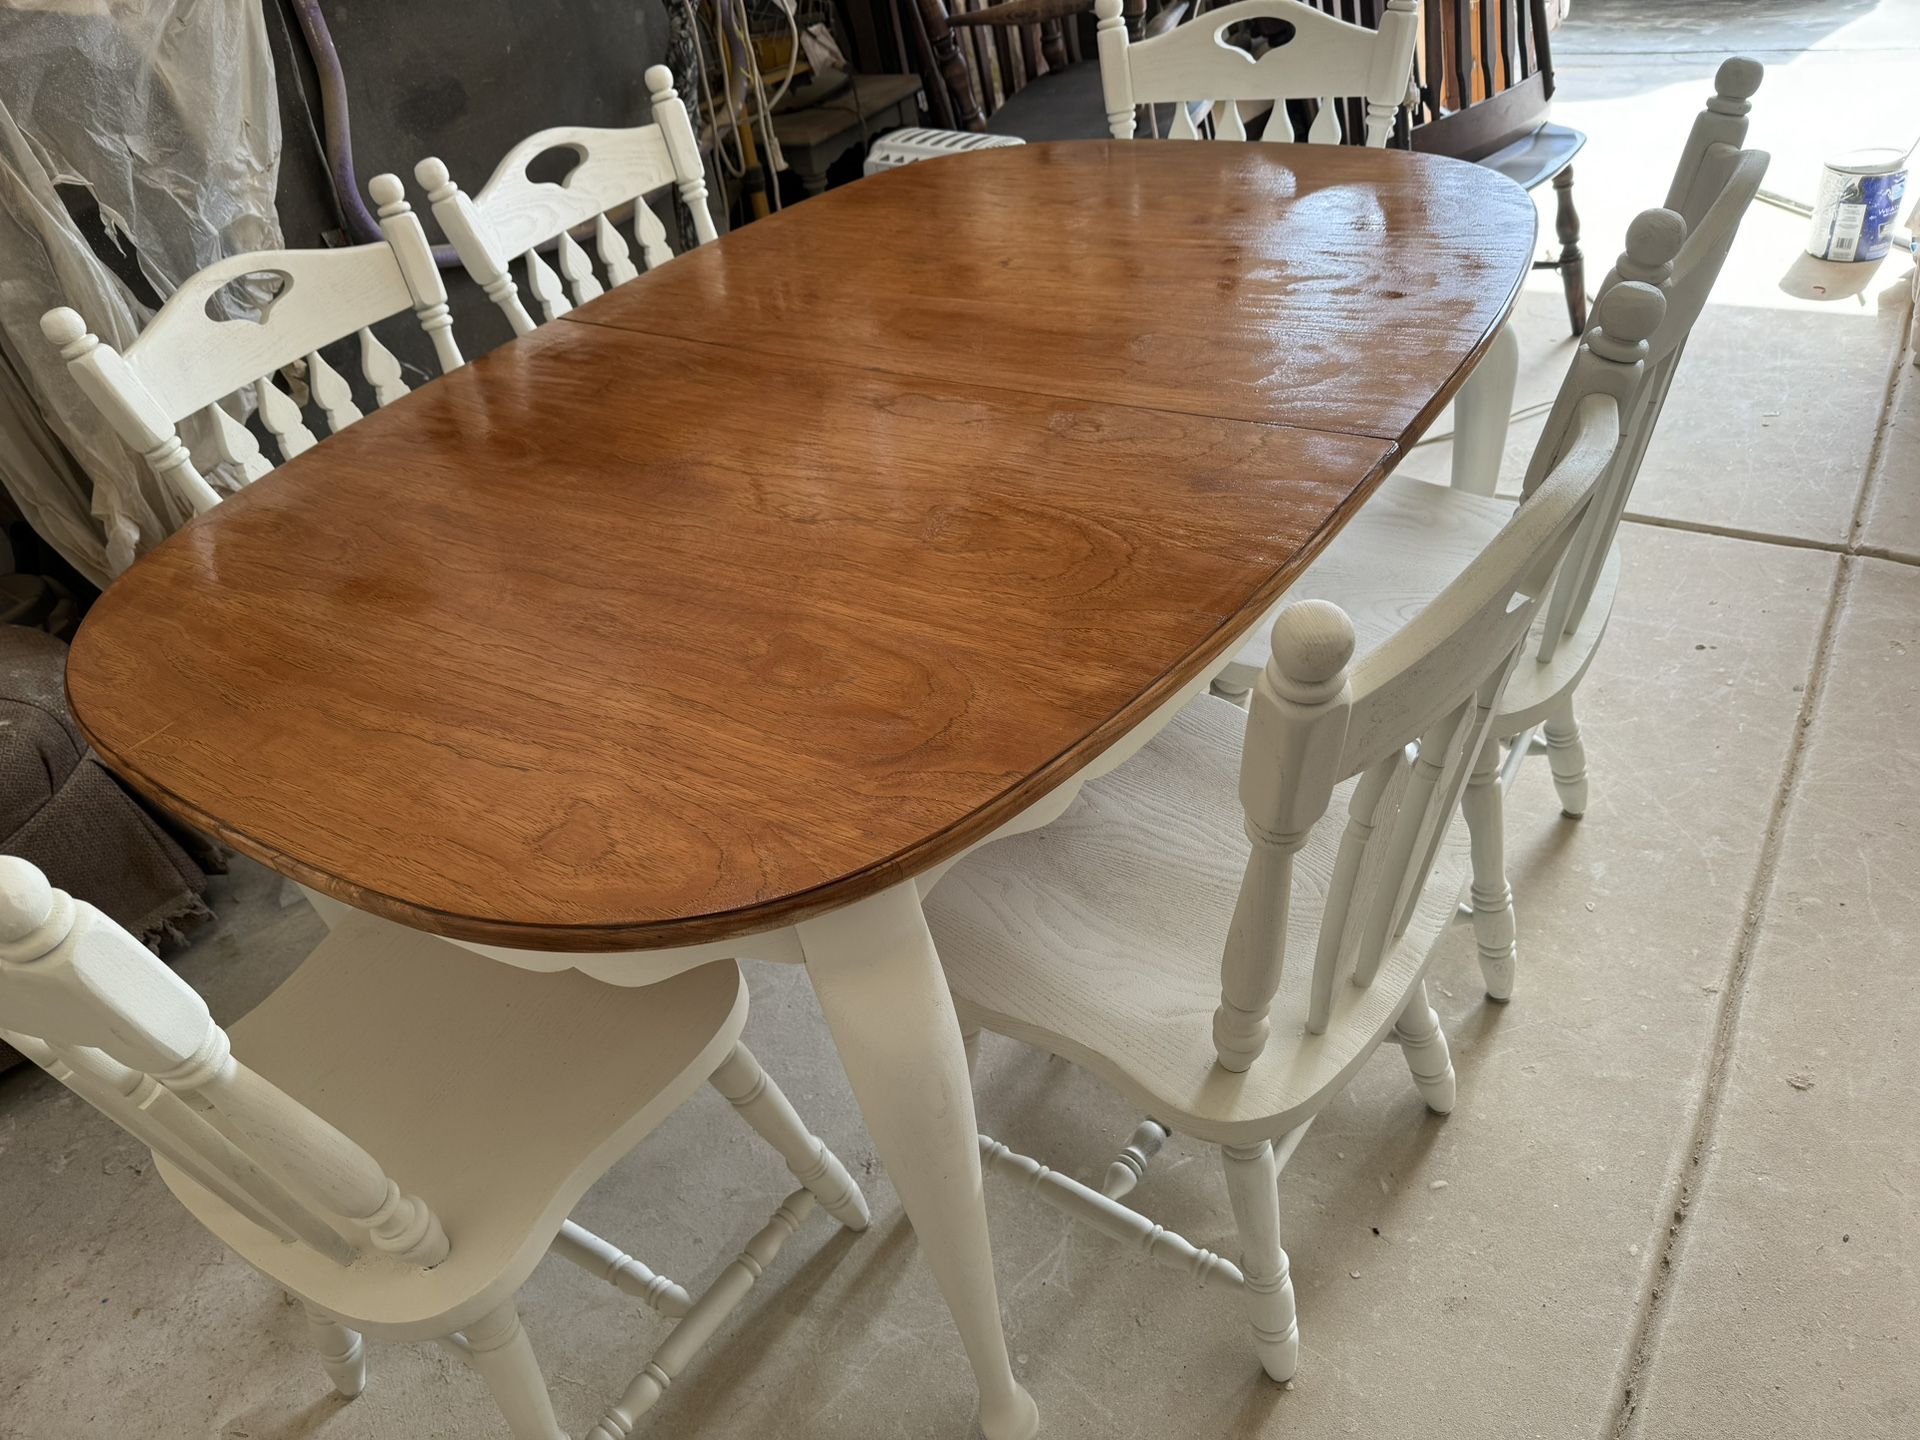 Farmhouse Style Dining Set With SIX Chairs